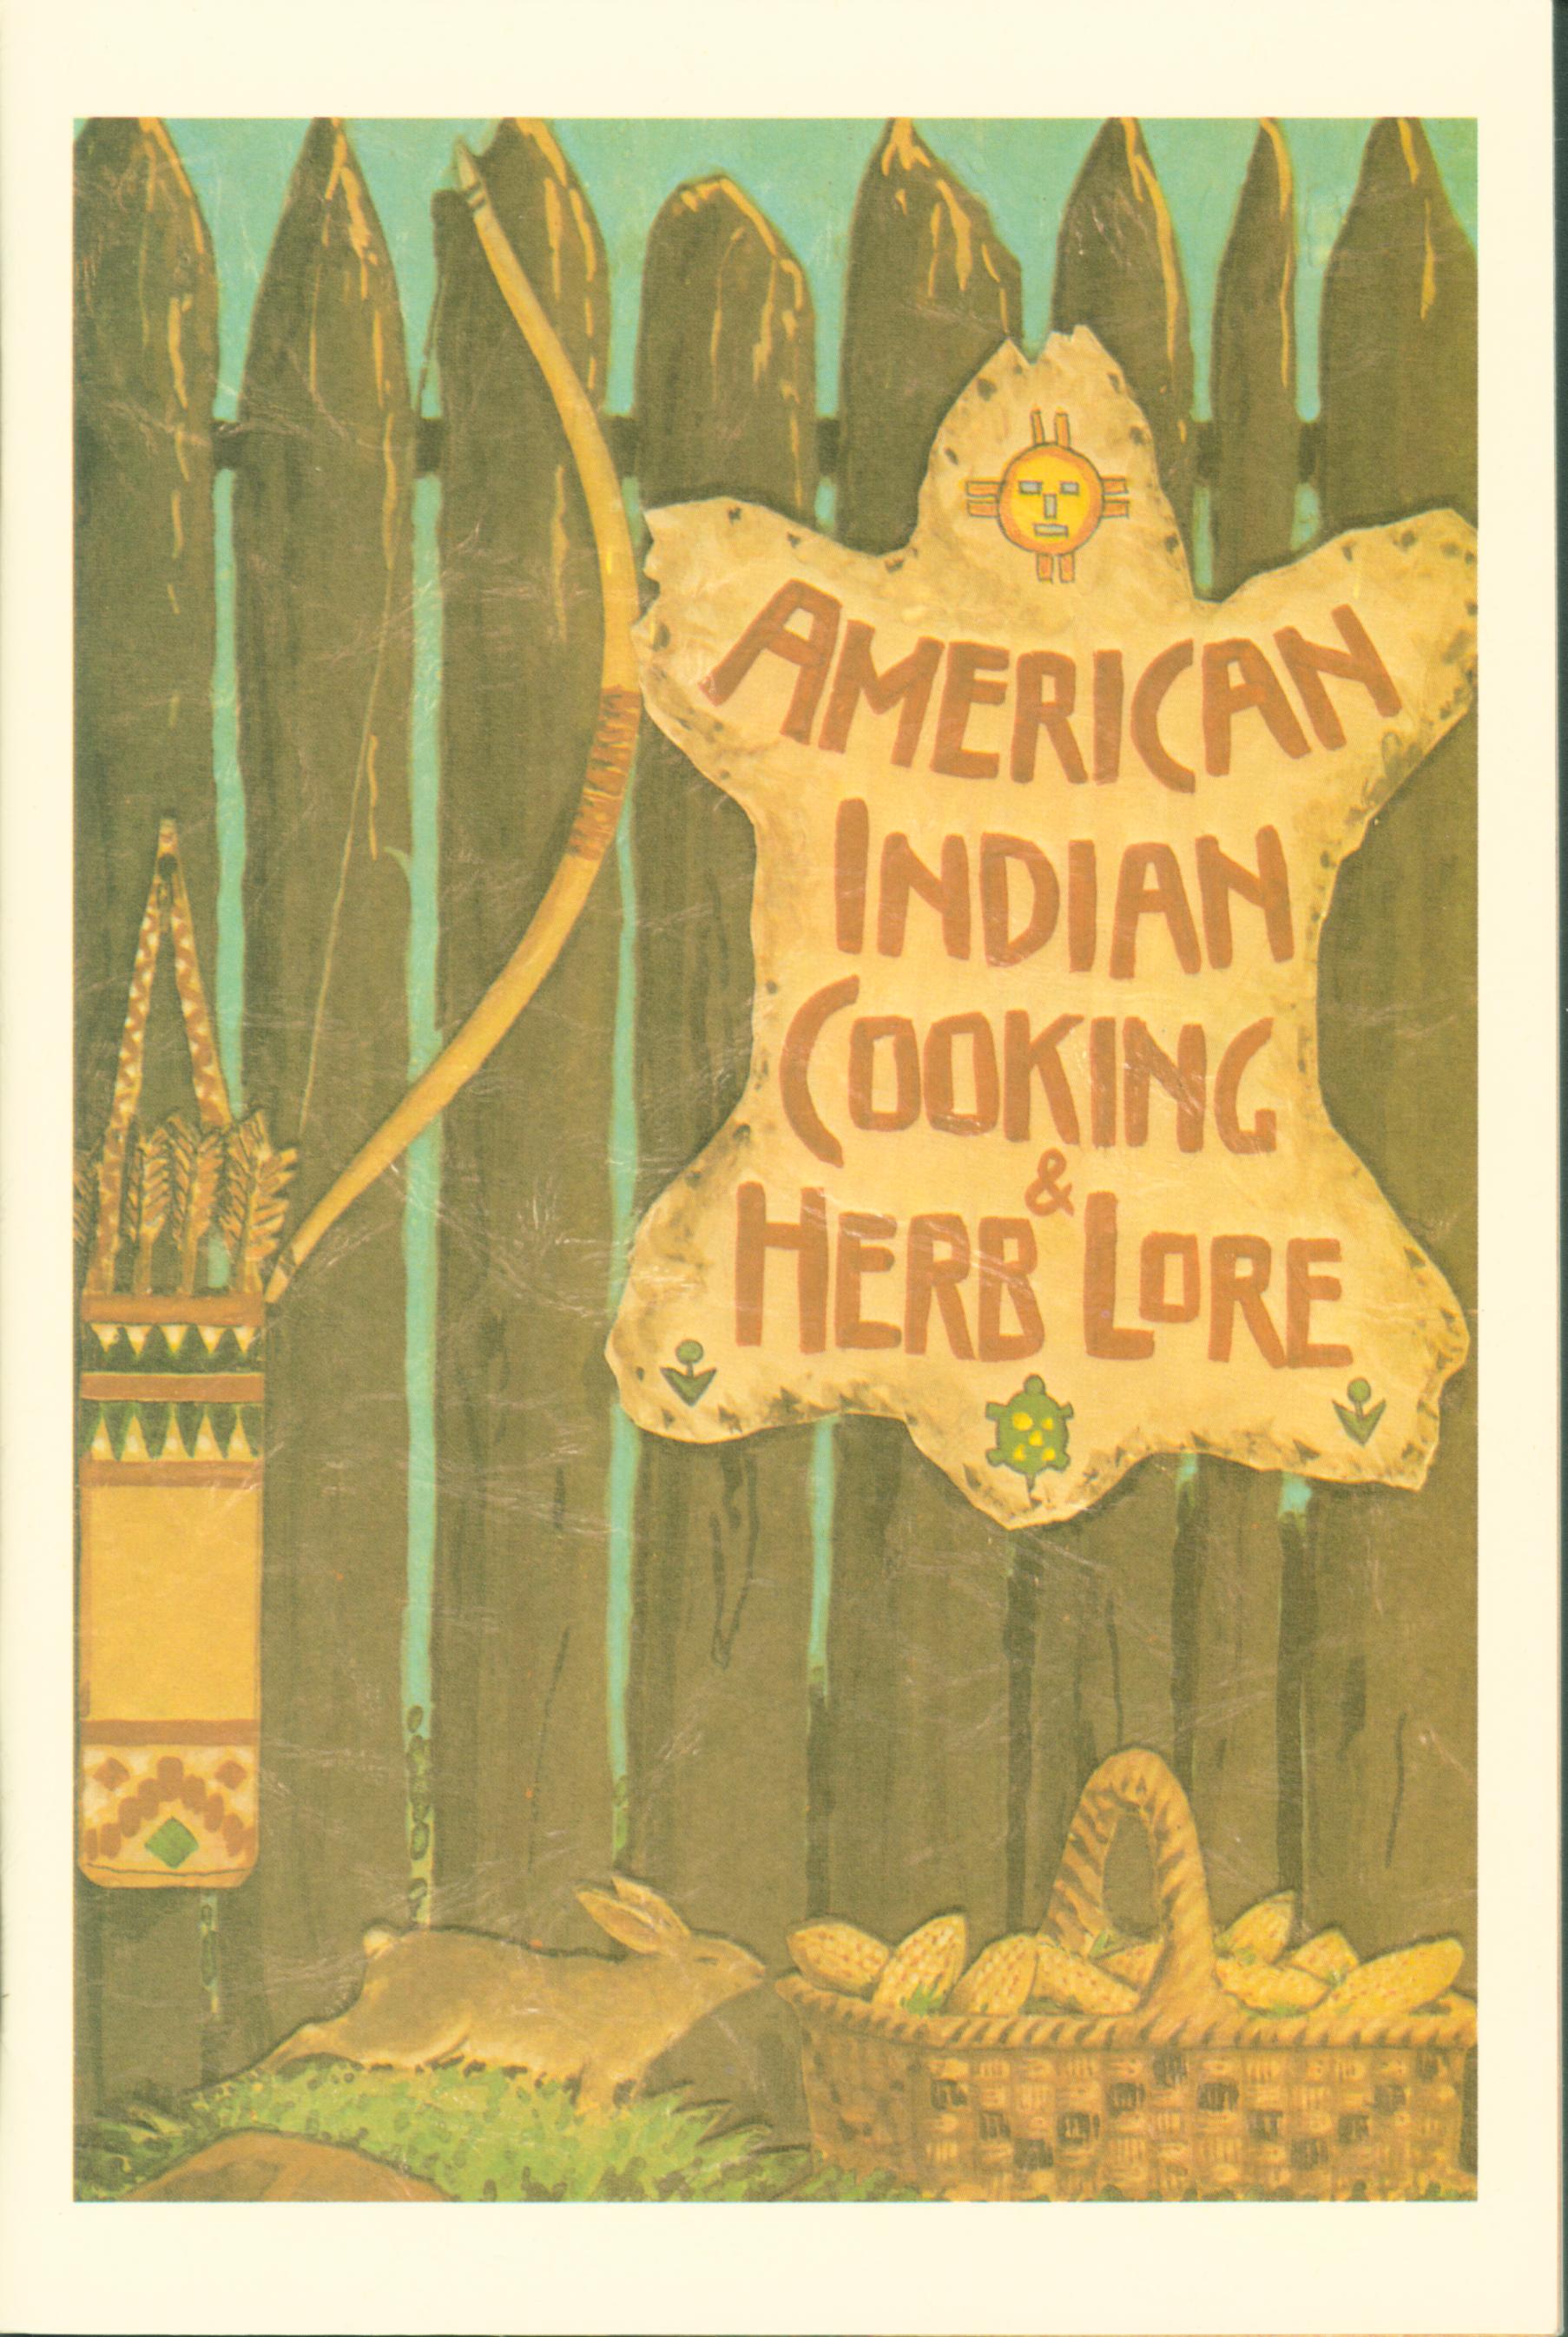 AMERICAN INDIAN COOKING & HERB LORE.